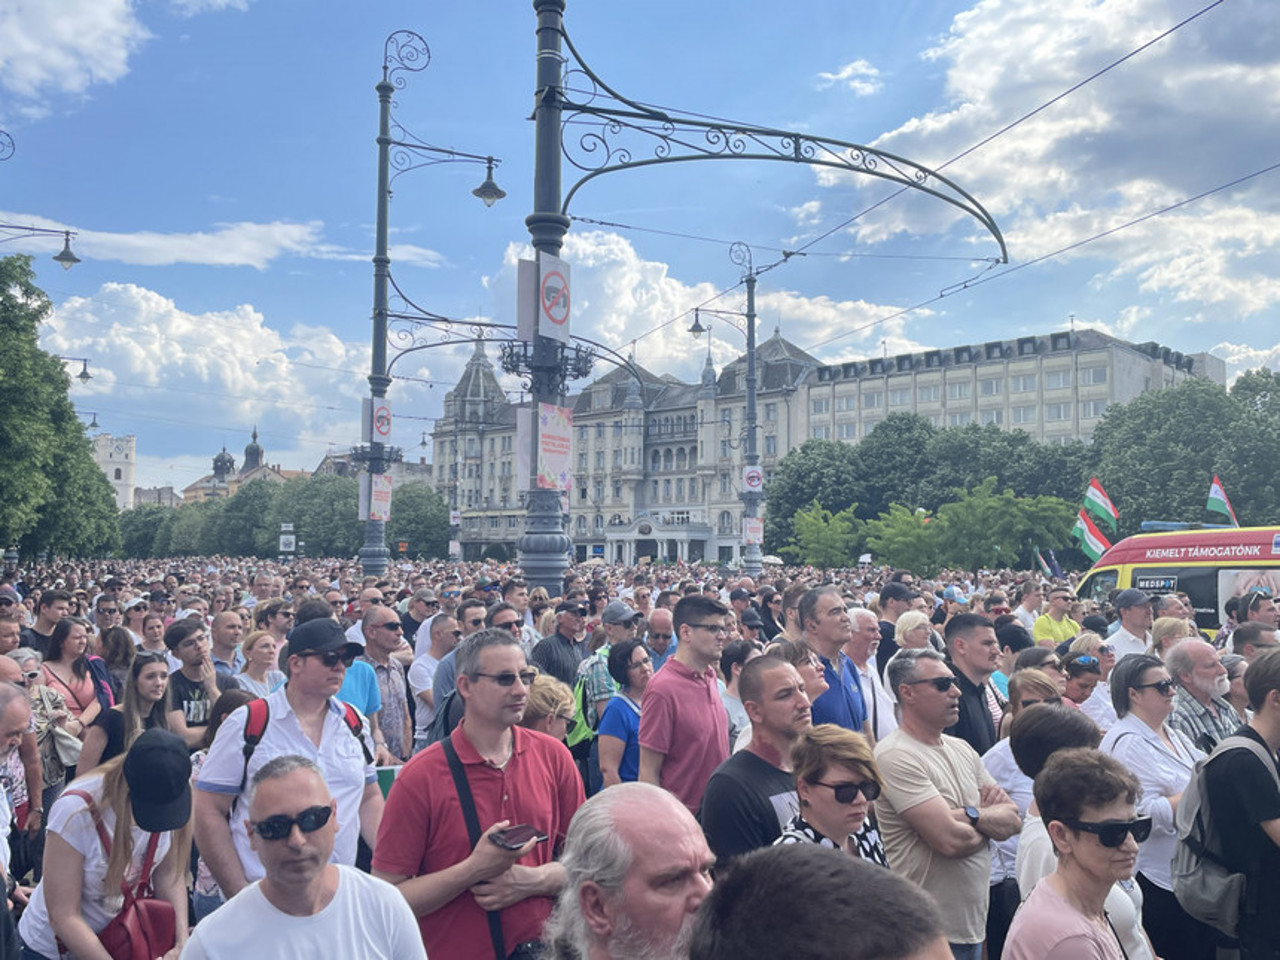 Thousands protest against Hungary's Orban in ruling party stronghold